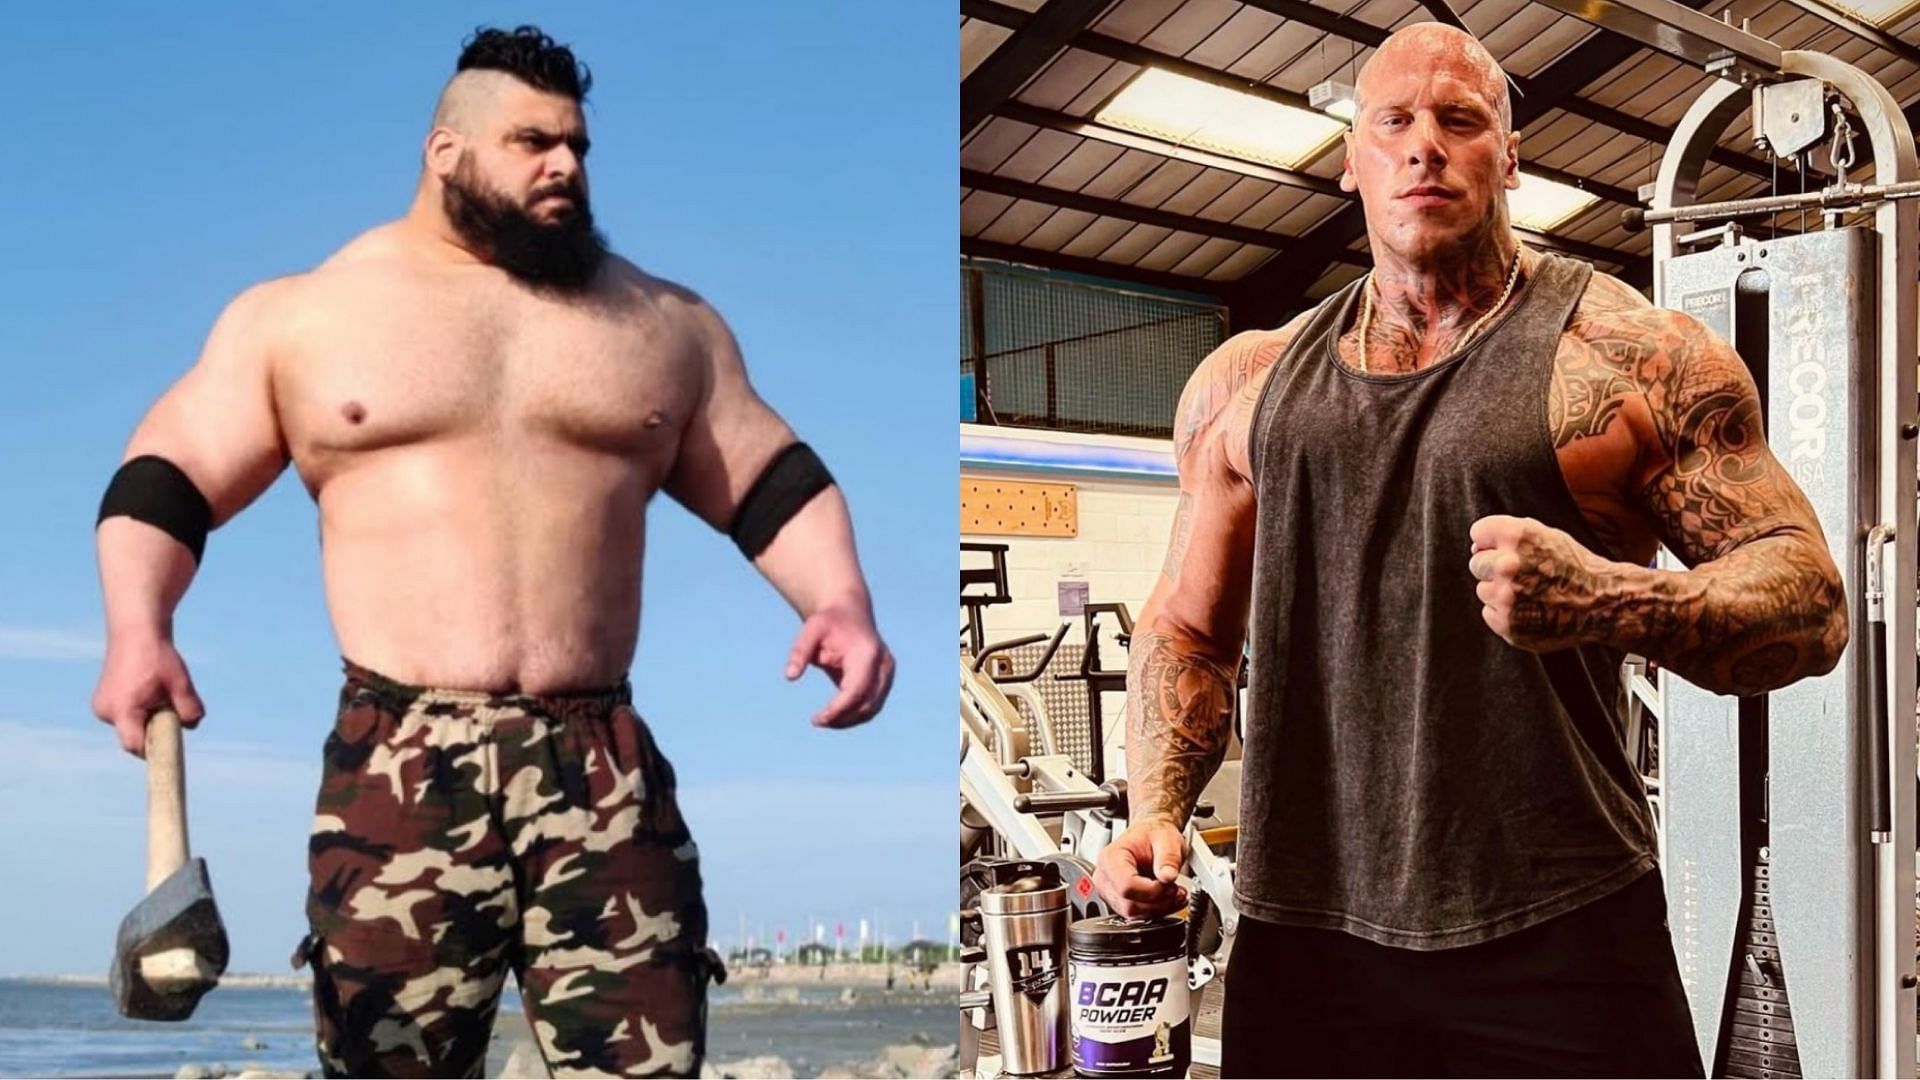 Comparing 'The Iranian Hulk' Sajad Gharibi and Martyn Ford's height and